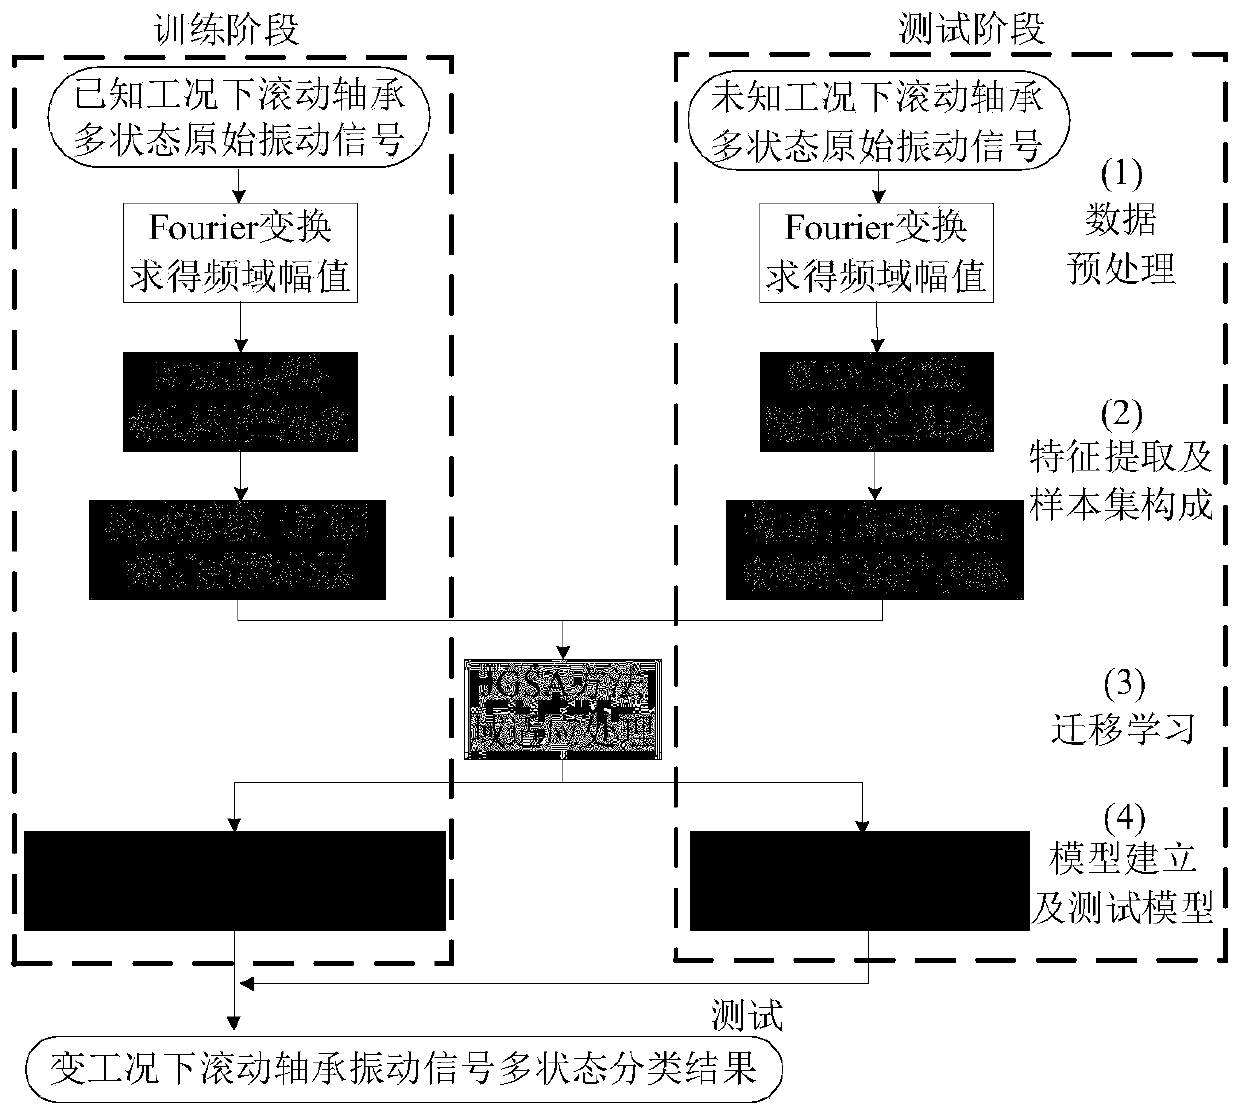 A rolling bearing fault diagnosis method under variable working conditions based on deep features and transfer learning